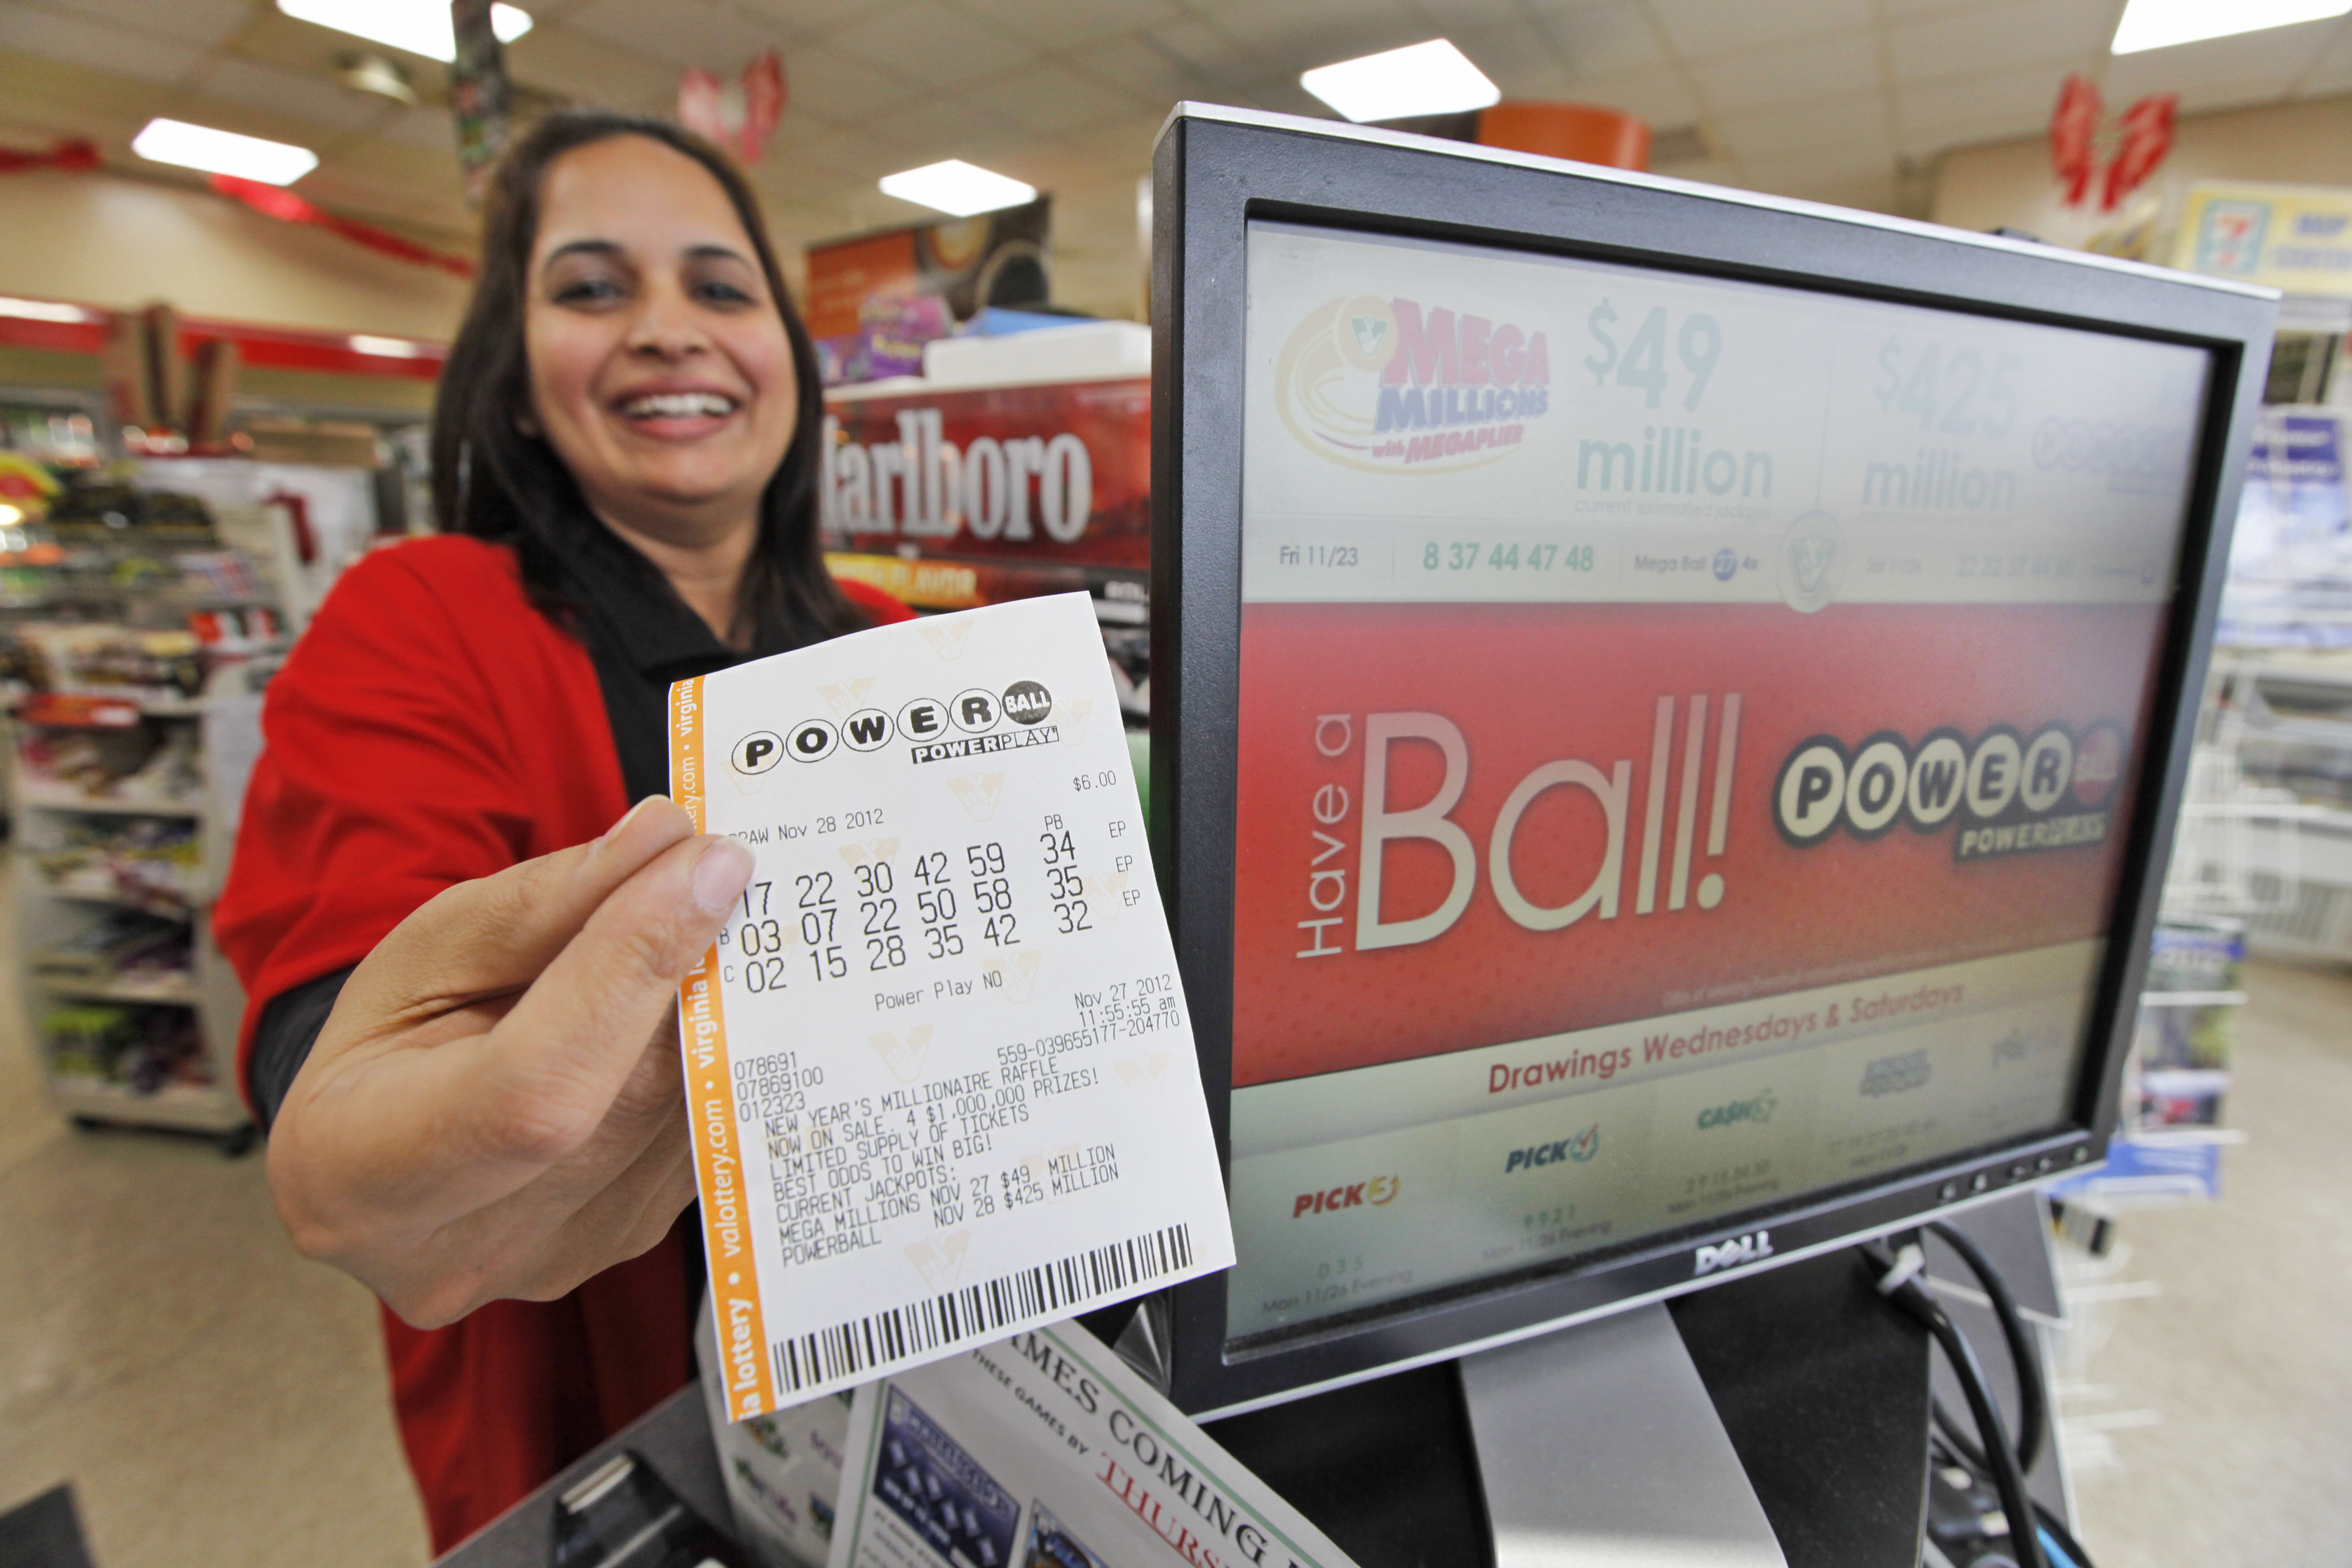 Record Powerball jackpot boosted to $500 million - CBS News